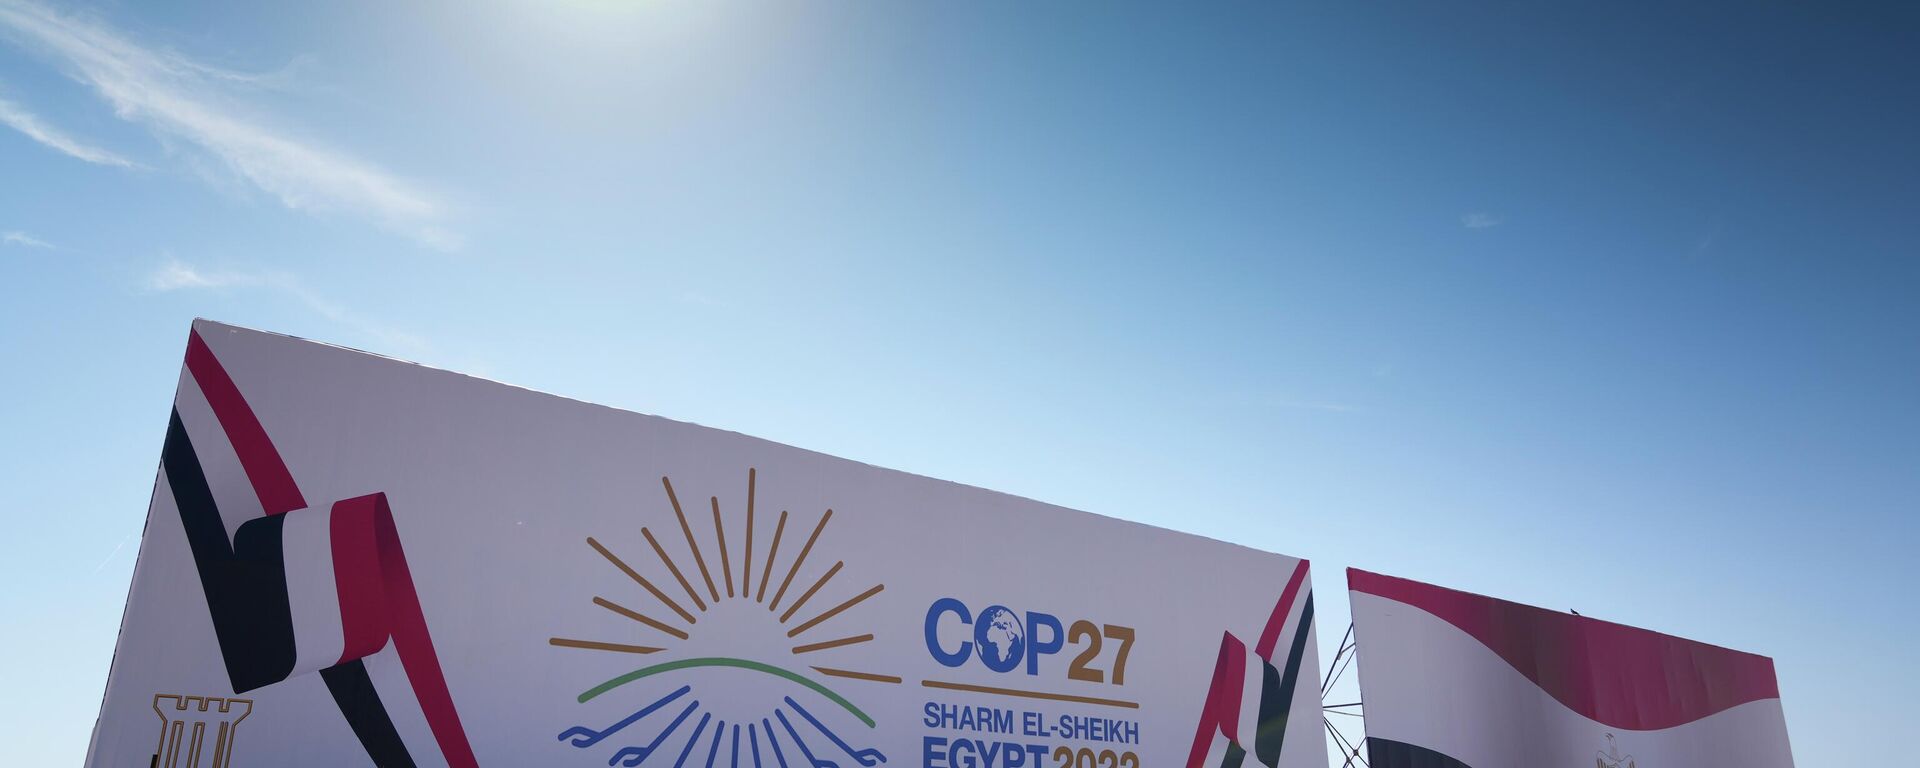 The COP27 U.N. Climate Summit logo and the Egyptian flag are displayed on a billboard lining a newly constructed highway in Sharm el-Sheikh, Egypt, Saturday, Nov. 5, 2022. - Sputnik International, 1920, 07.11.2022